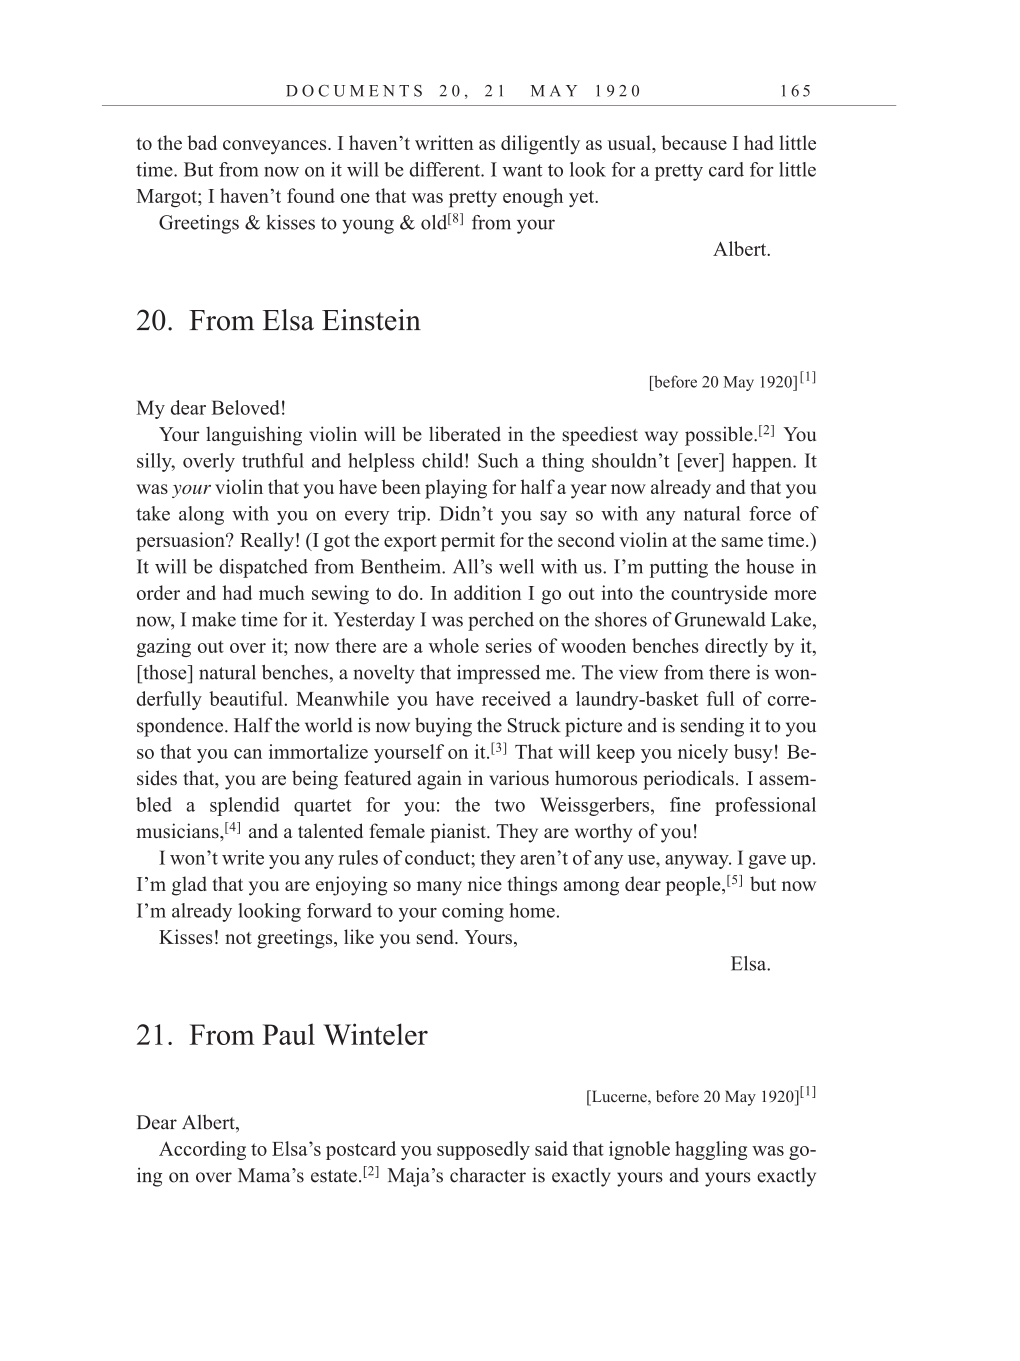 Volume 10: The Berlin Years: Correspondence, May-December 1920, and Supplementary Correspondence, 1909-1920 (English translation supplement) page 165